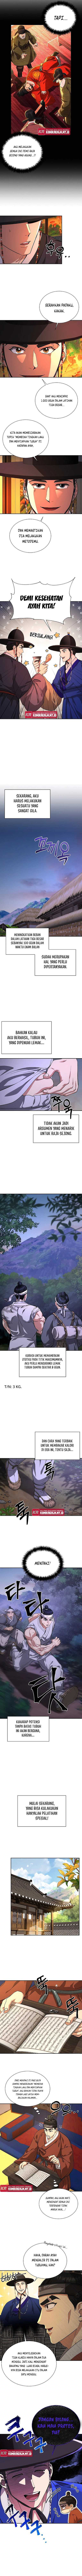 Muscle Joseon Chapter 08